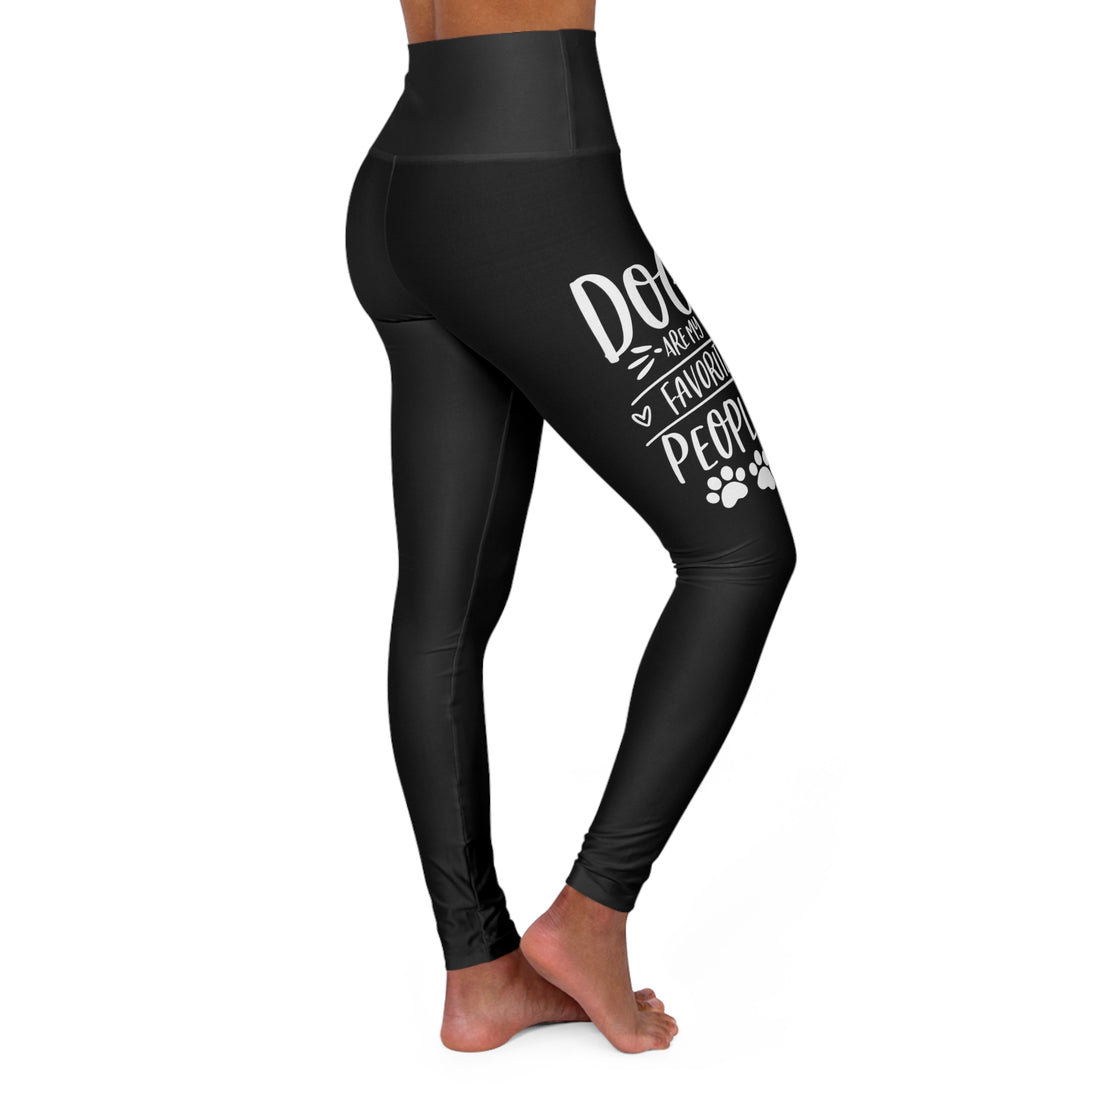 Dogs Are My Favorite People - Black High Waisted Yoga Leggings